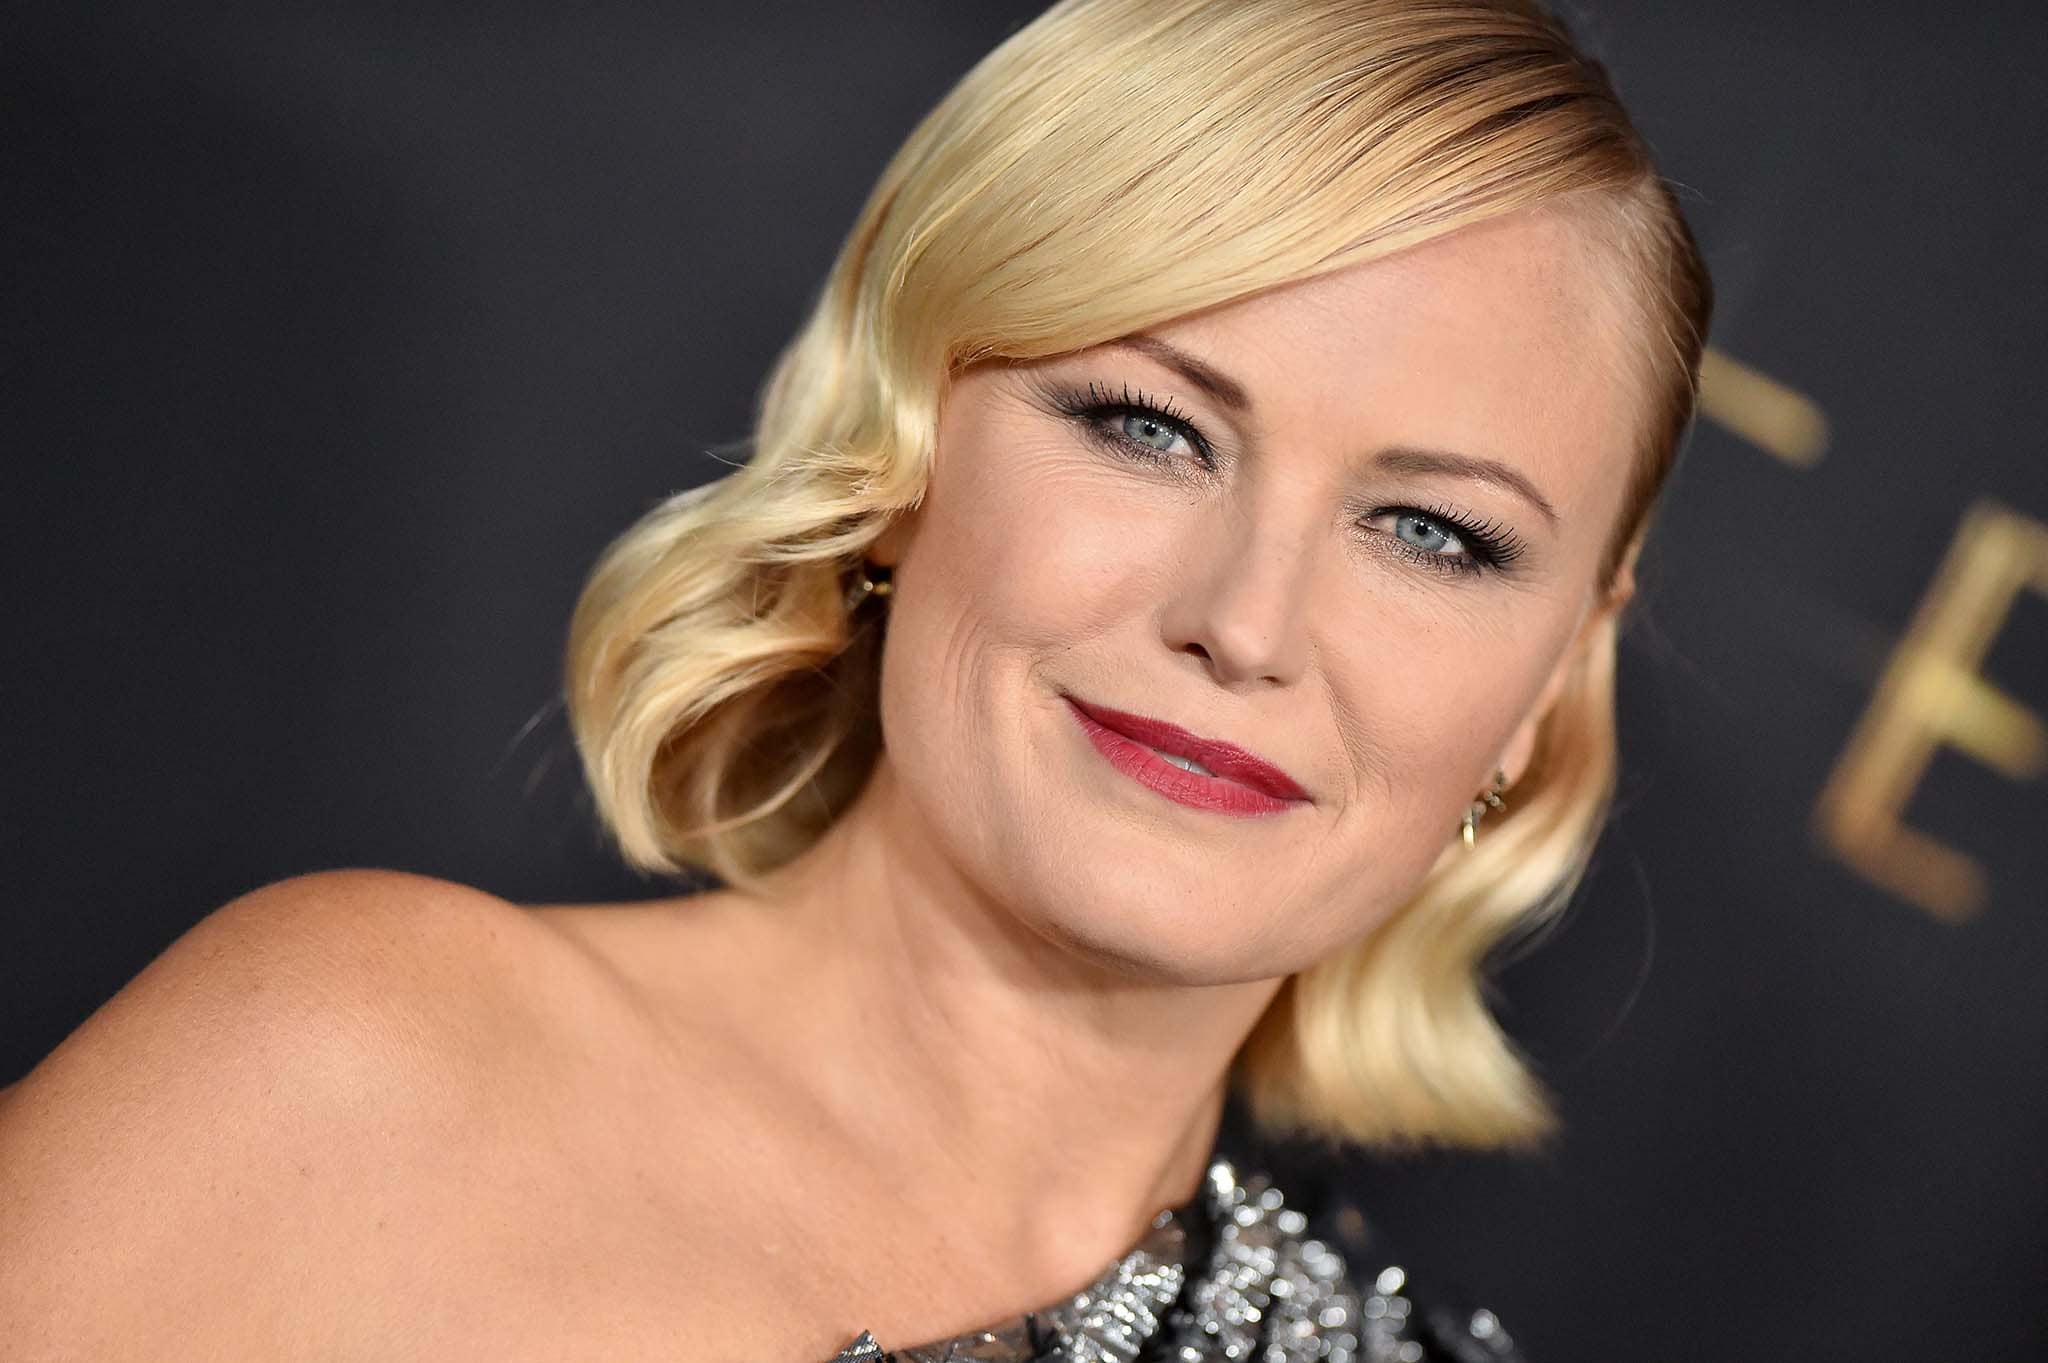 Malin Akerman adds retro glam to her ultra-modern outfit with old Hollywood waves and red lipstick